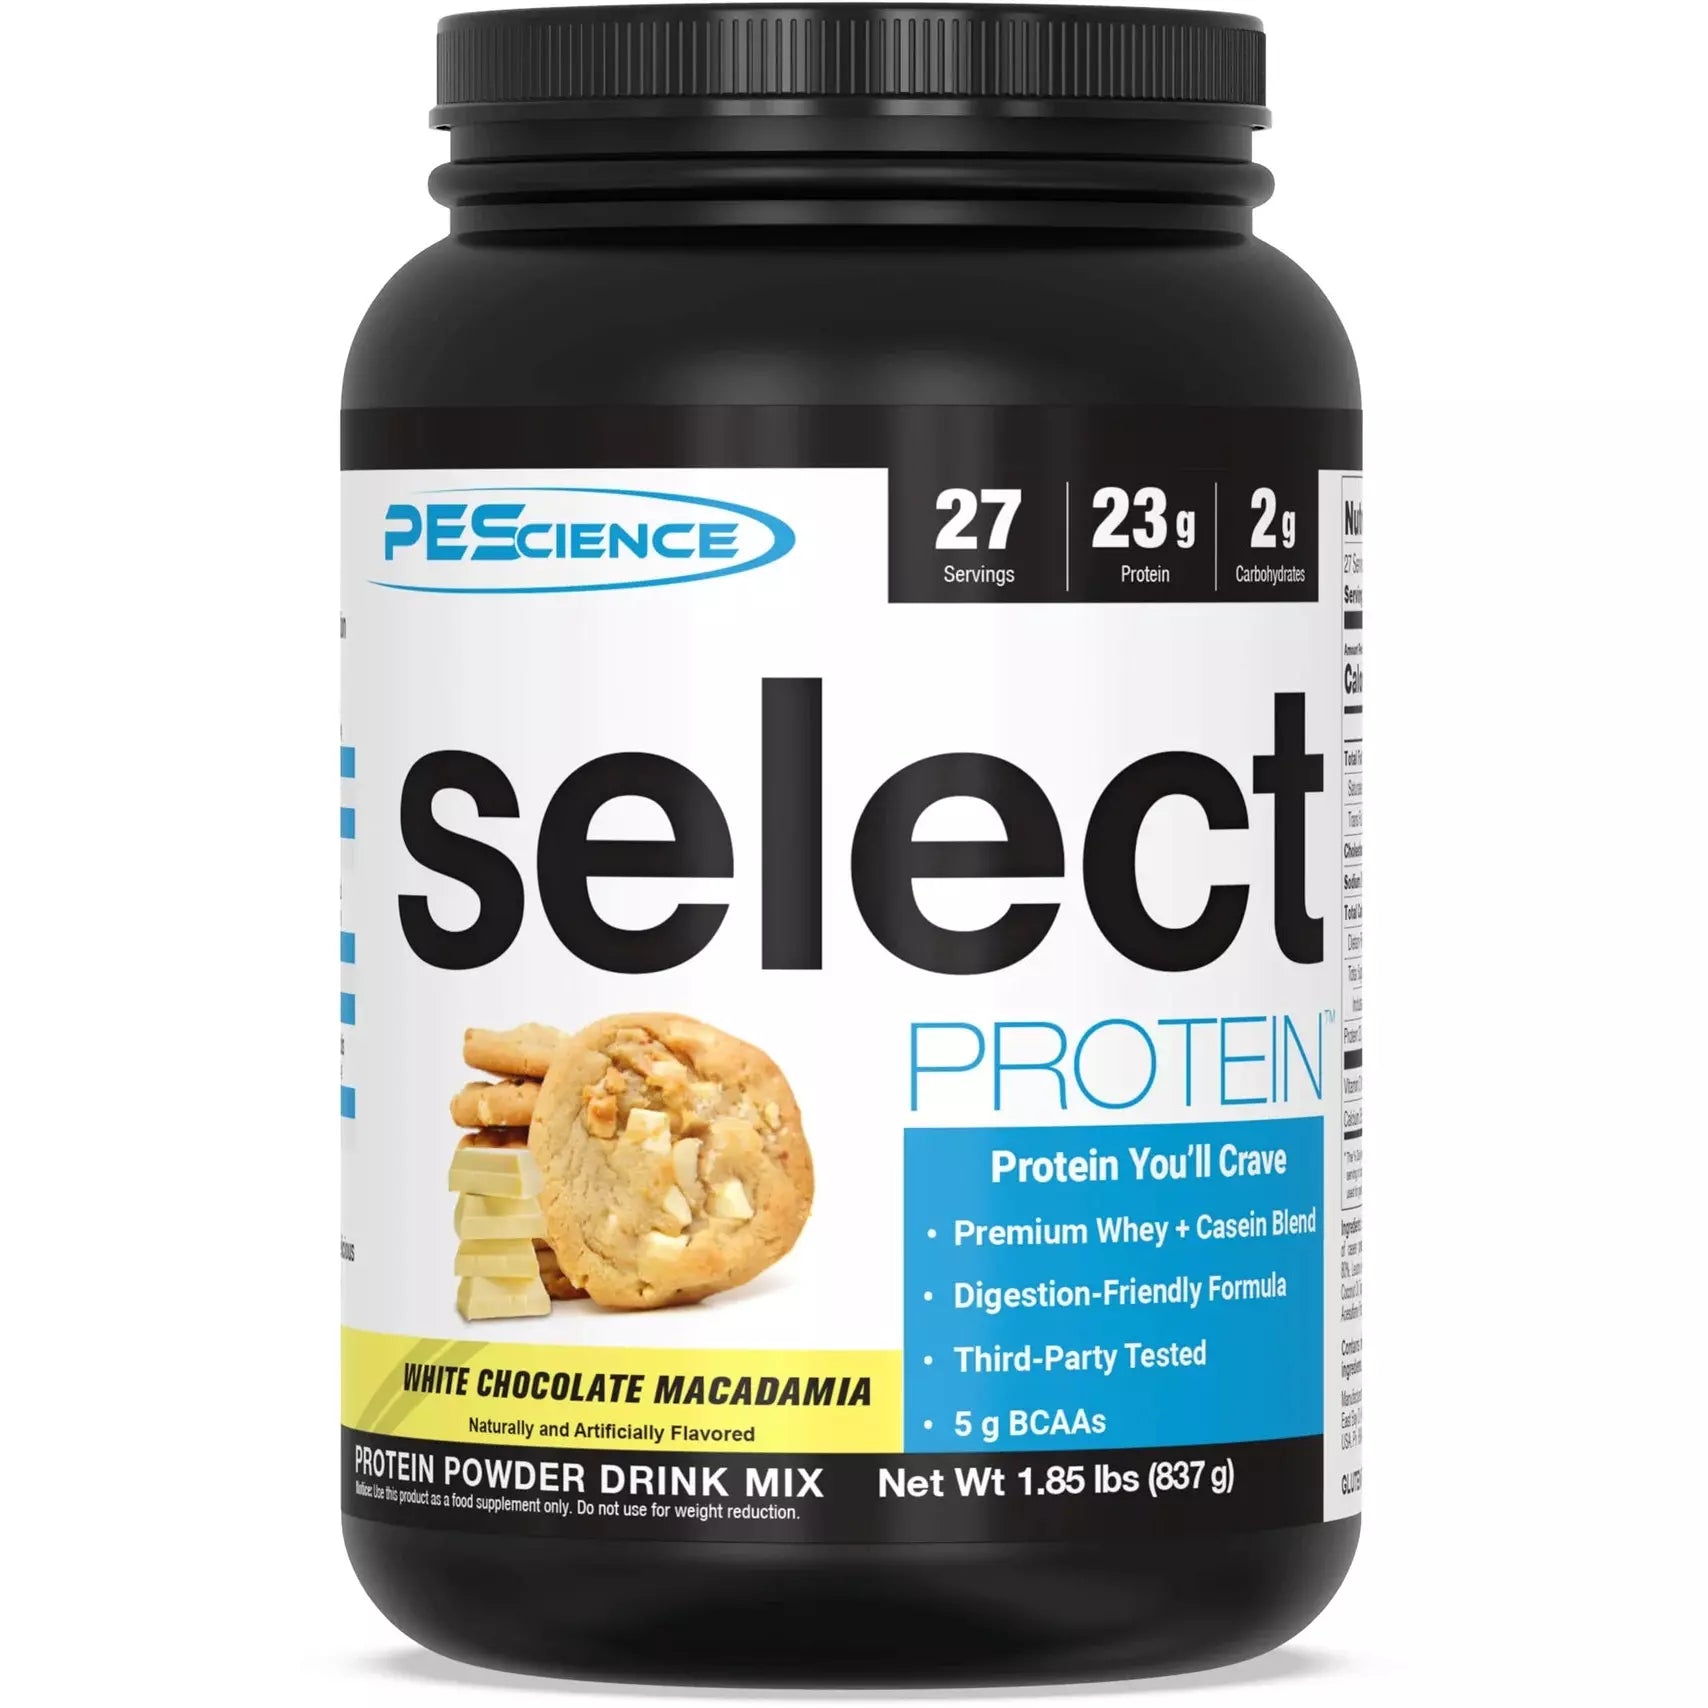 PEScience Select Protein (27 servings) Whey Protein Blend NEW! White Chocolate Macadamia PEScience